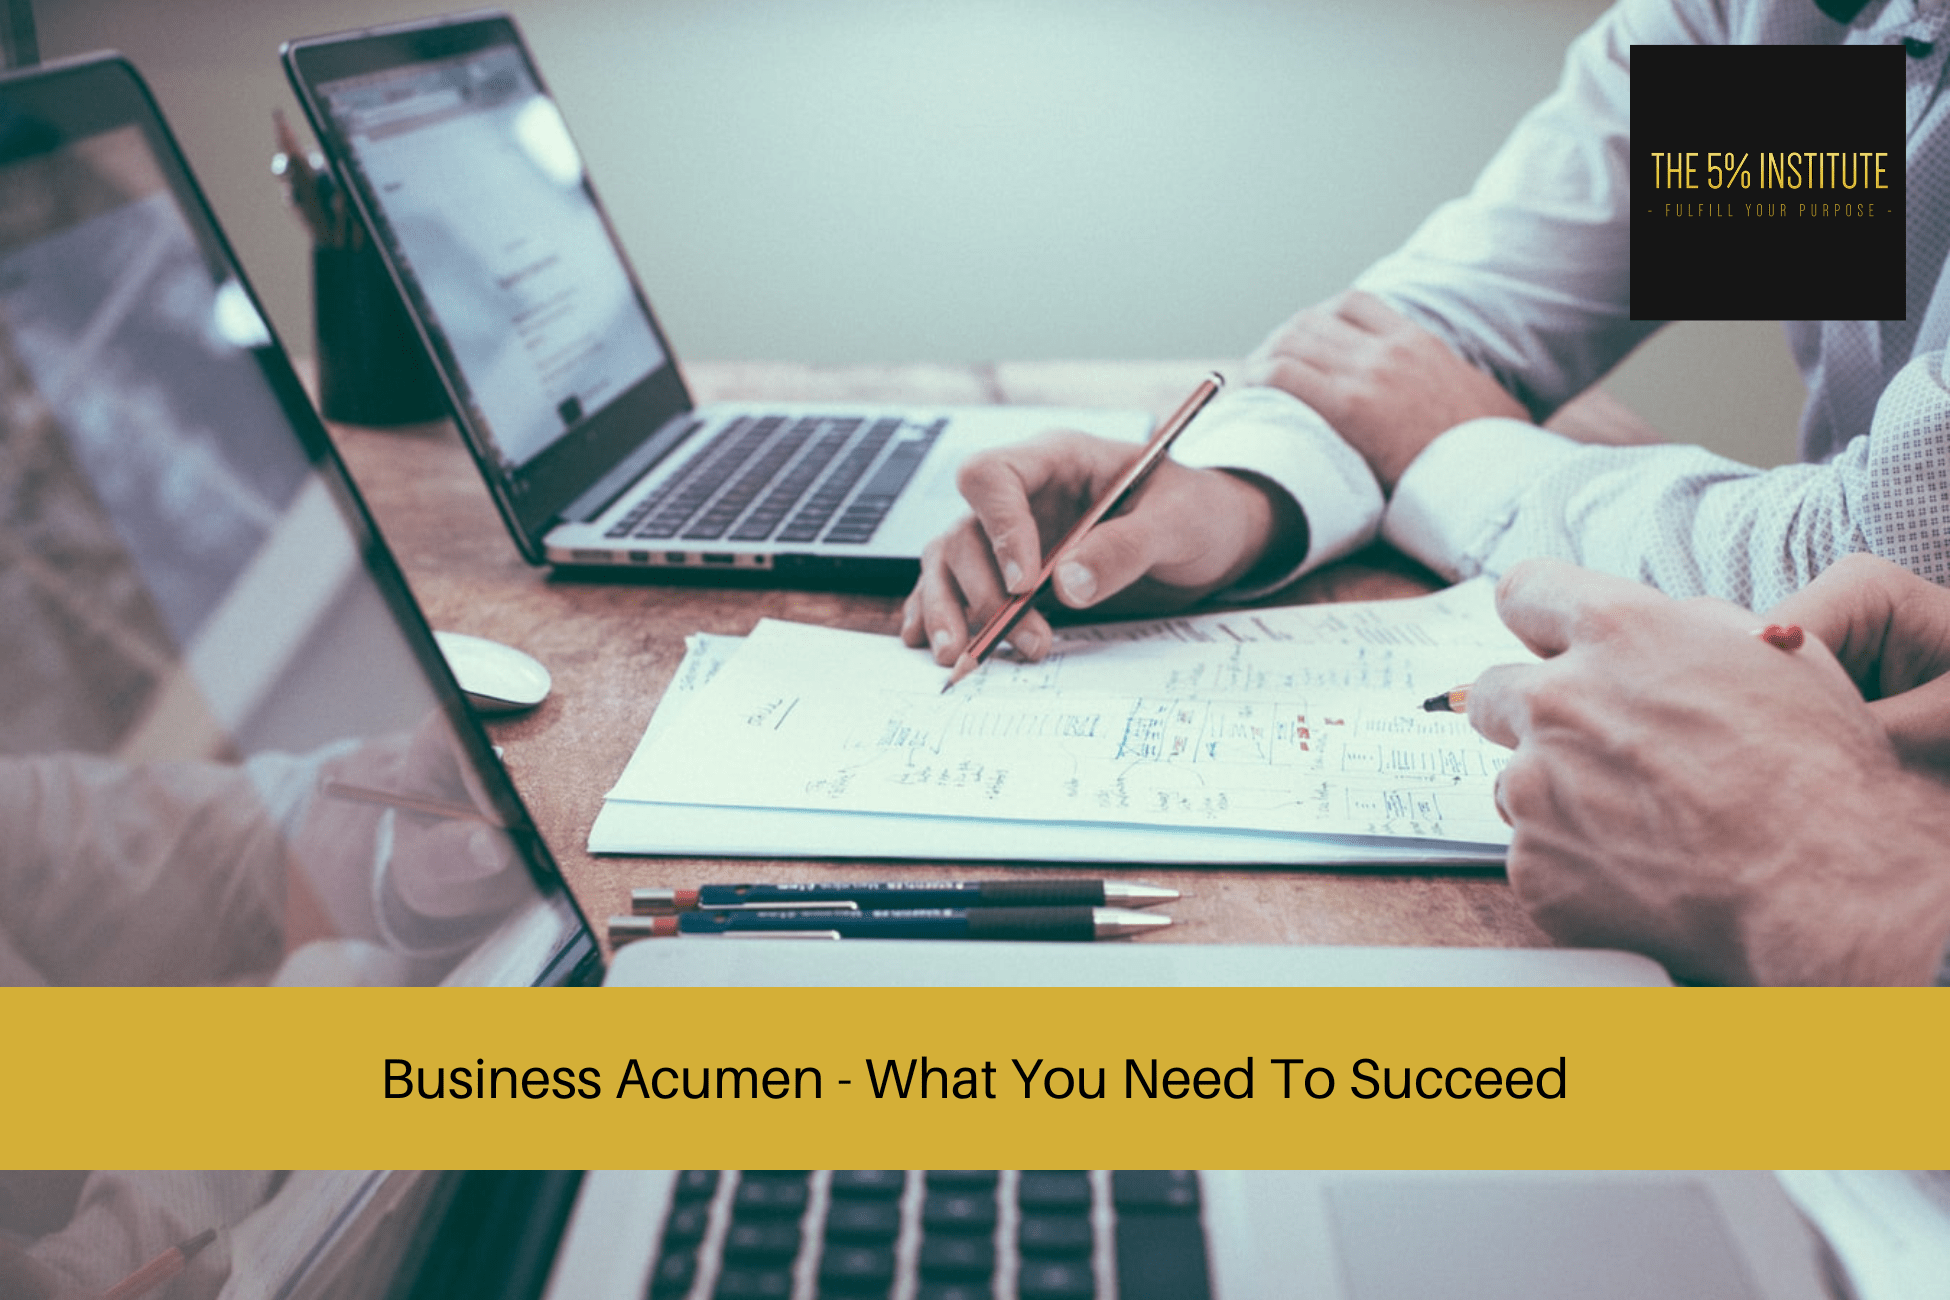 Business Acumen - What You Need To Succeed